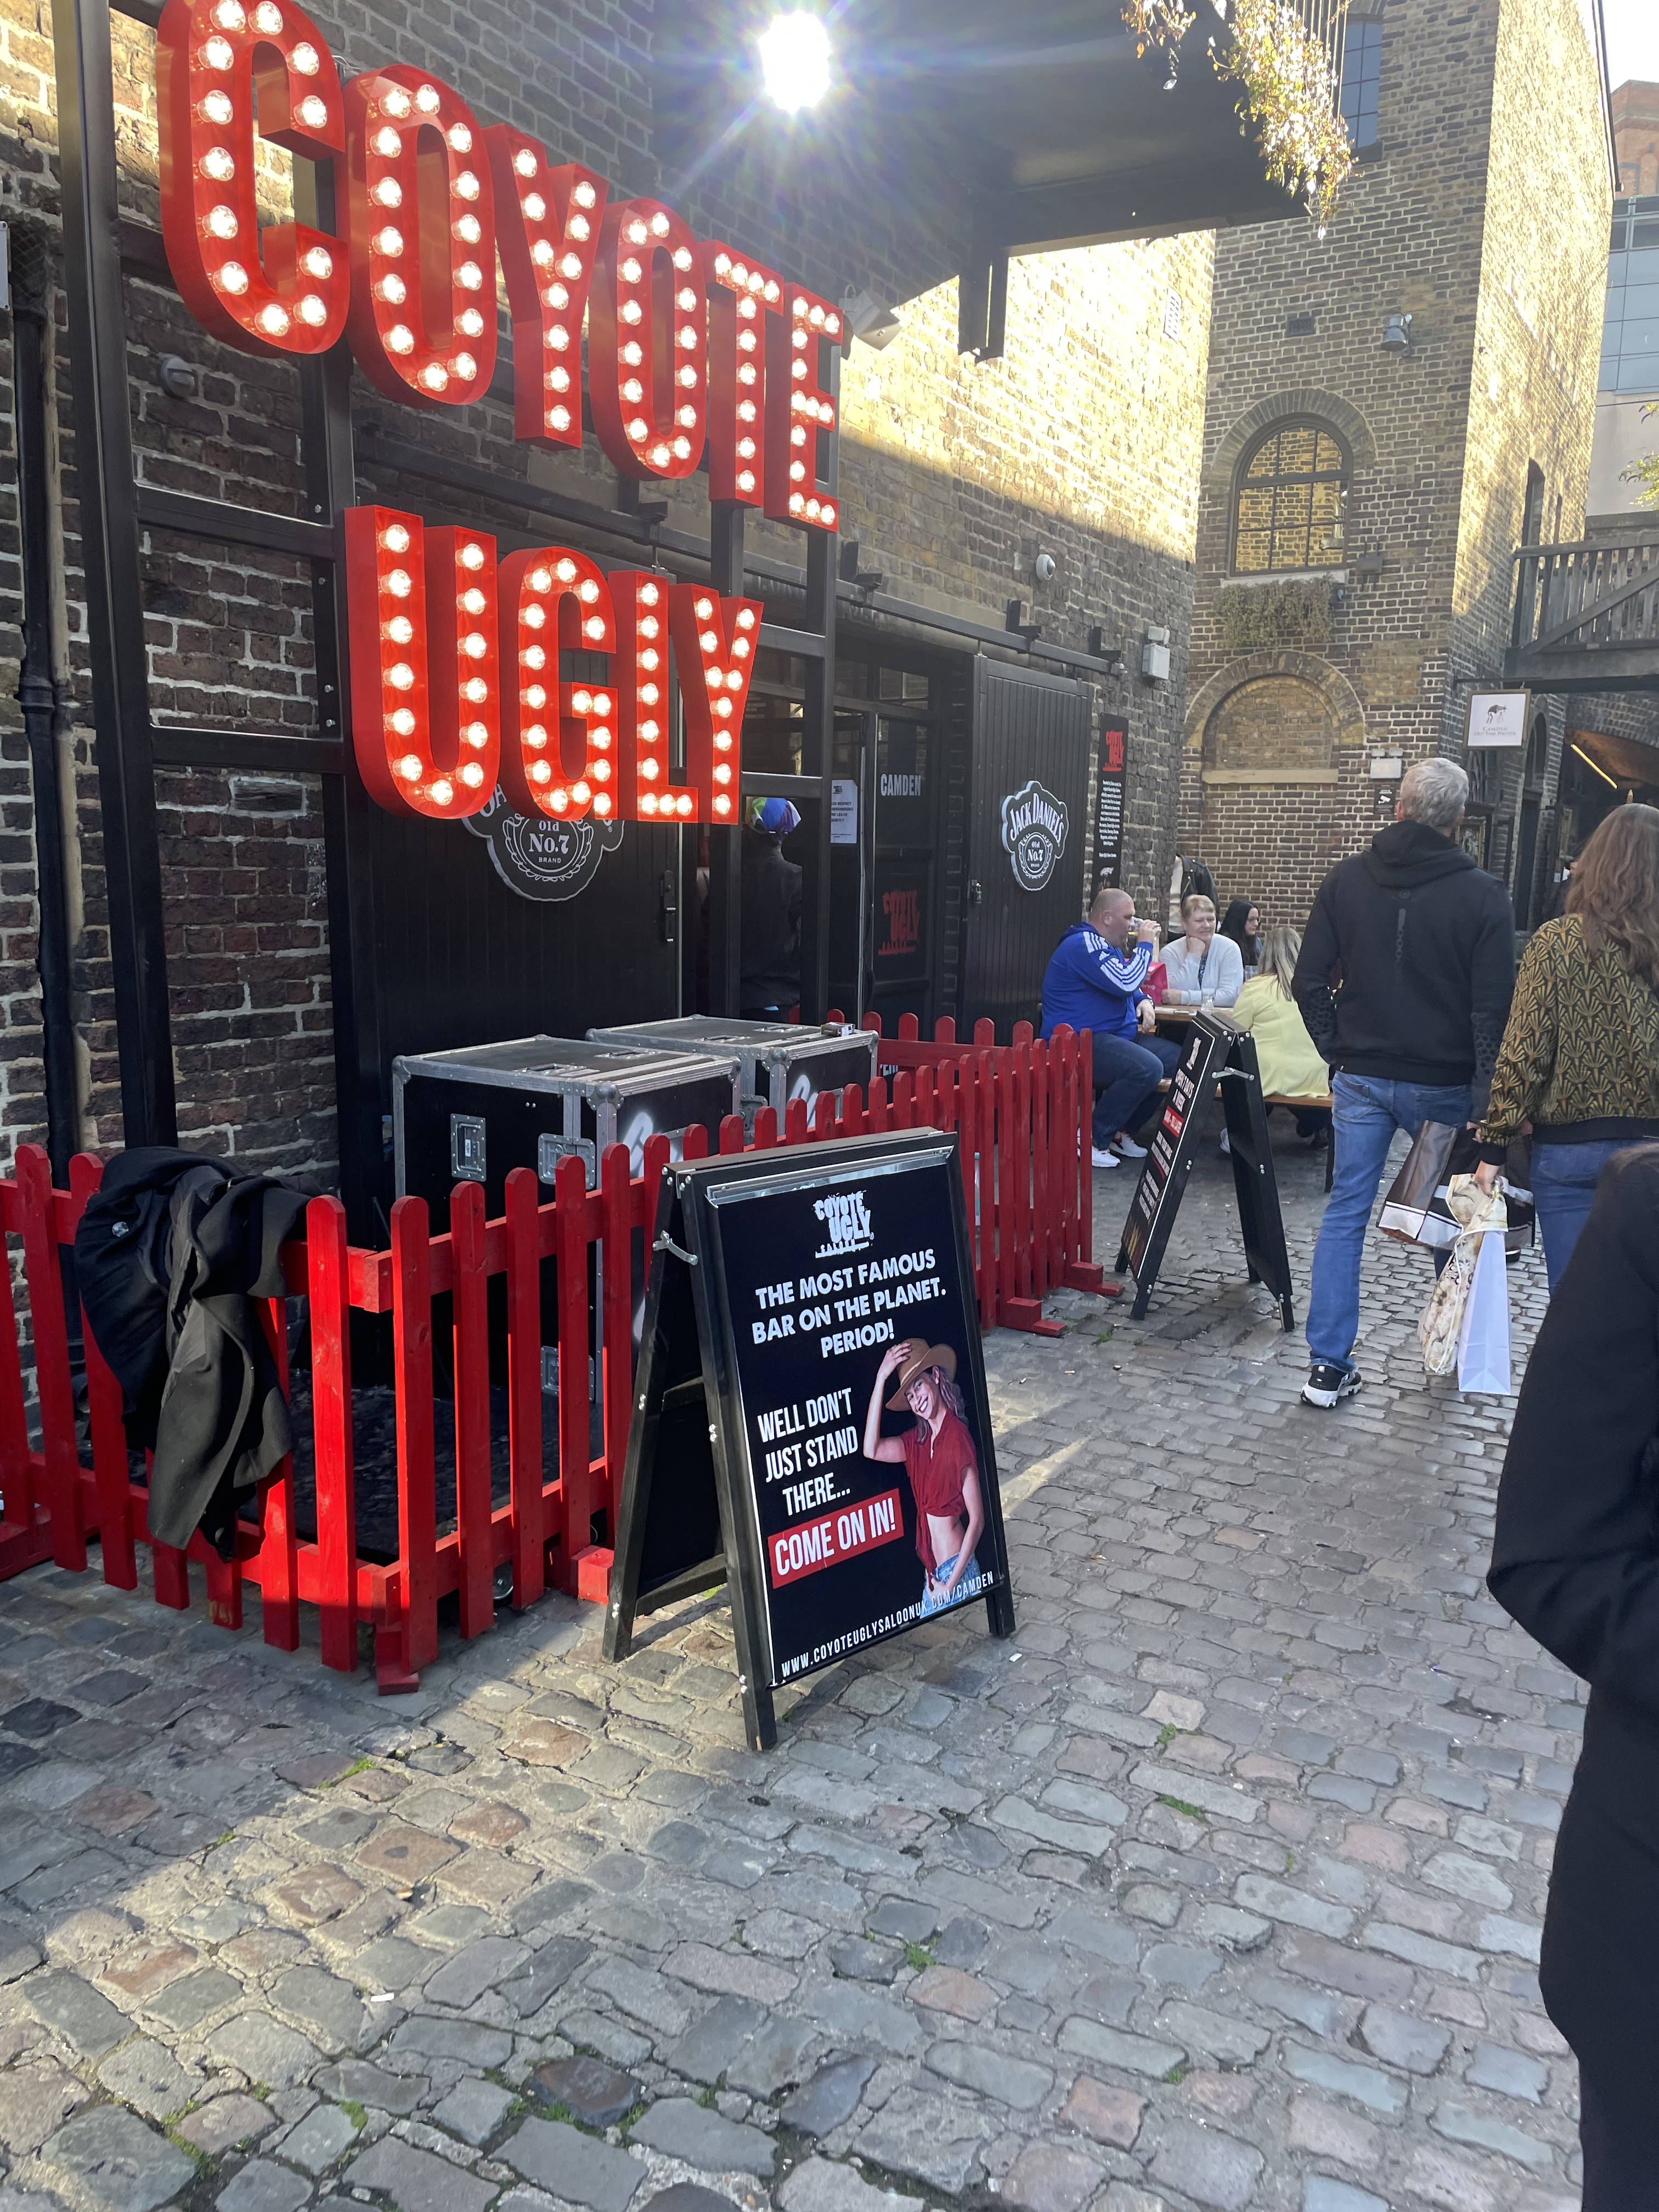 Coyote Ugly at Camden Stables Market